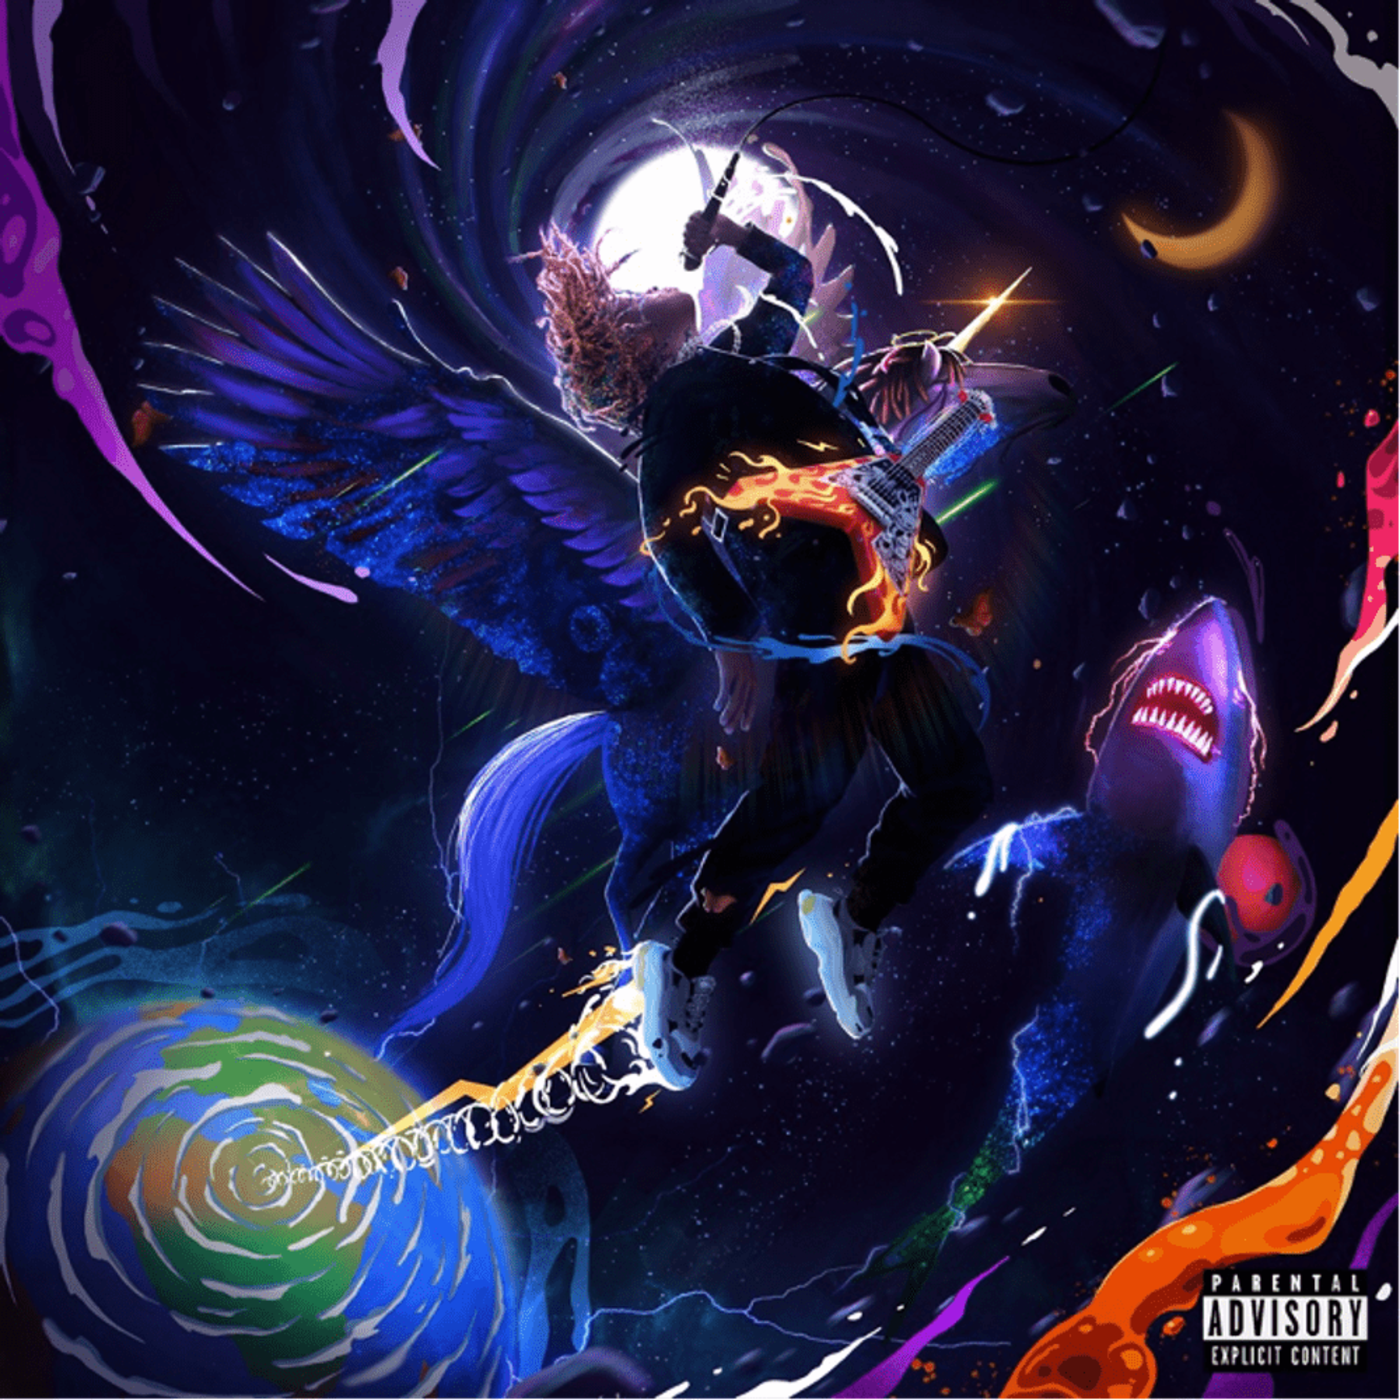 Trippie Redd Shares ‘Neon Shark vs Pegasus’ Project Executive Produced by Travis Barker